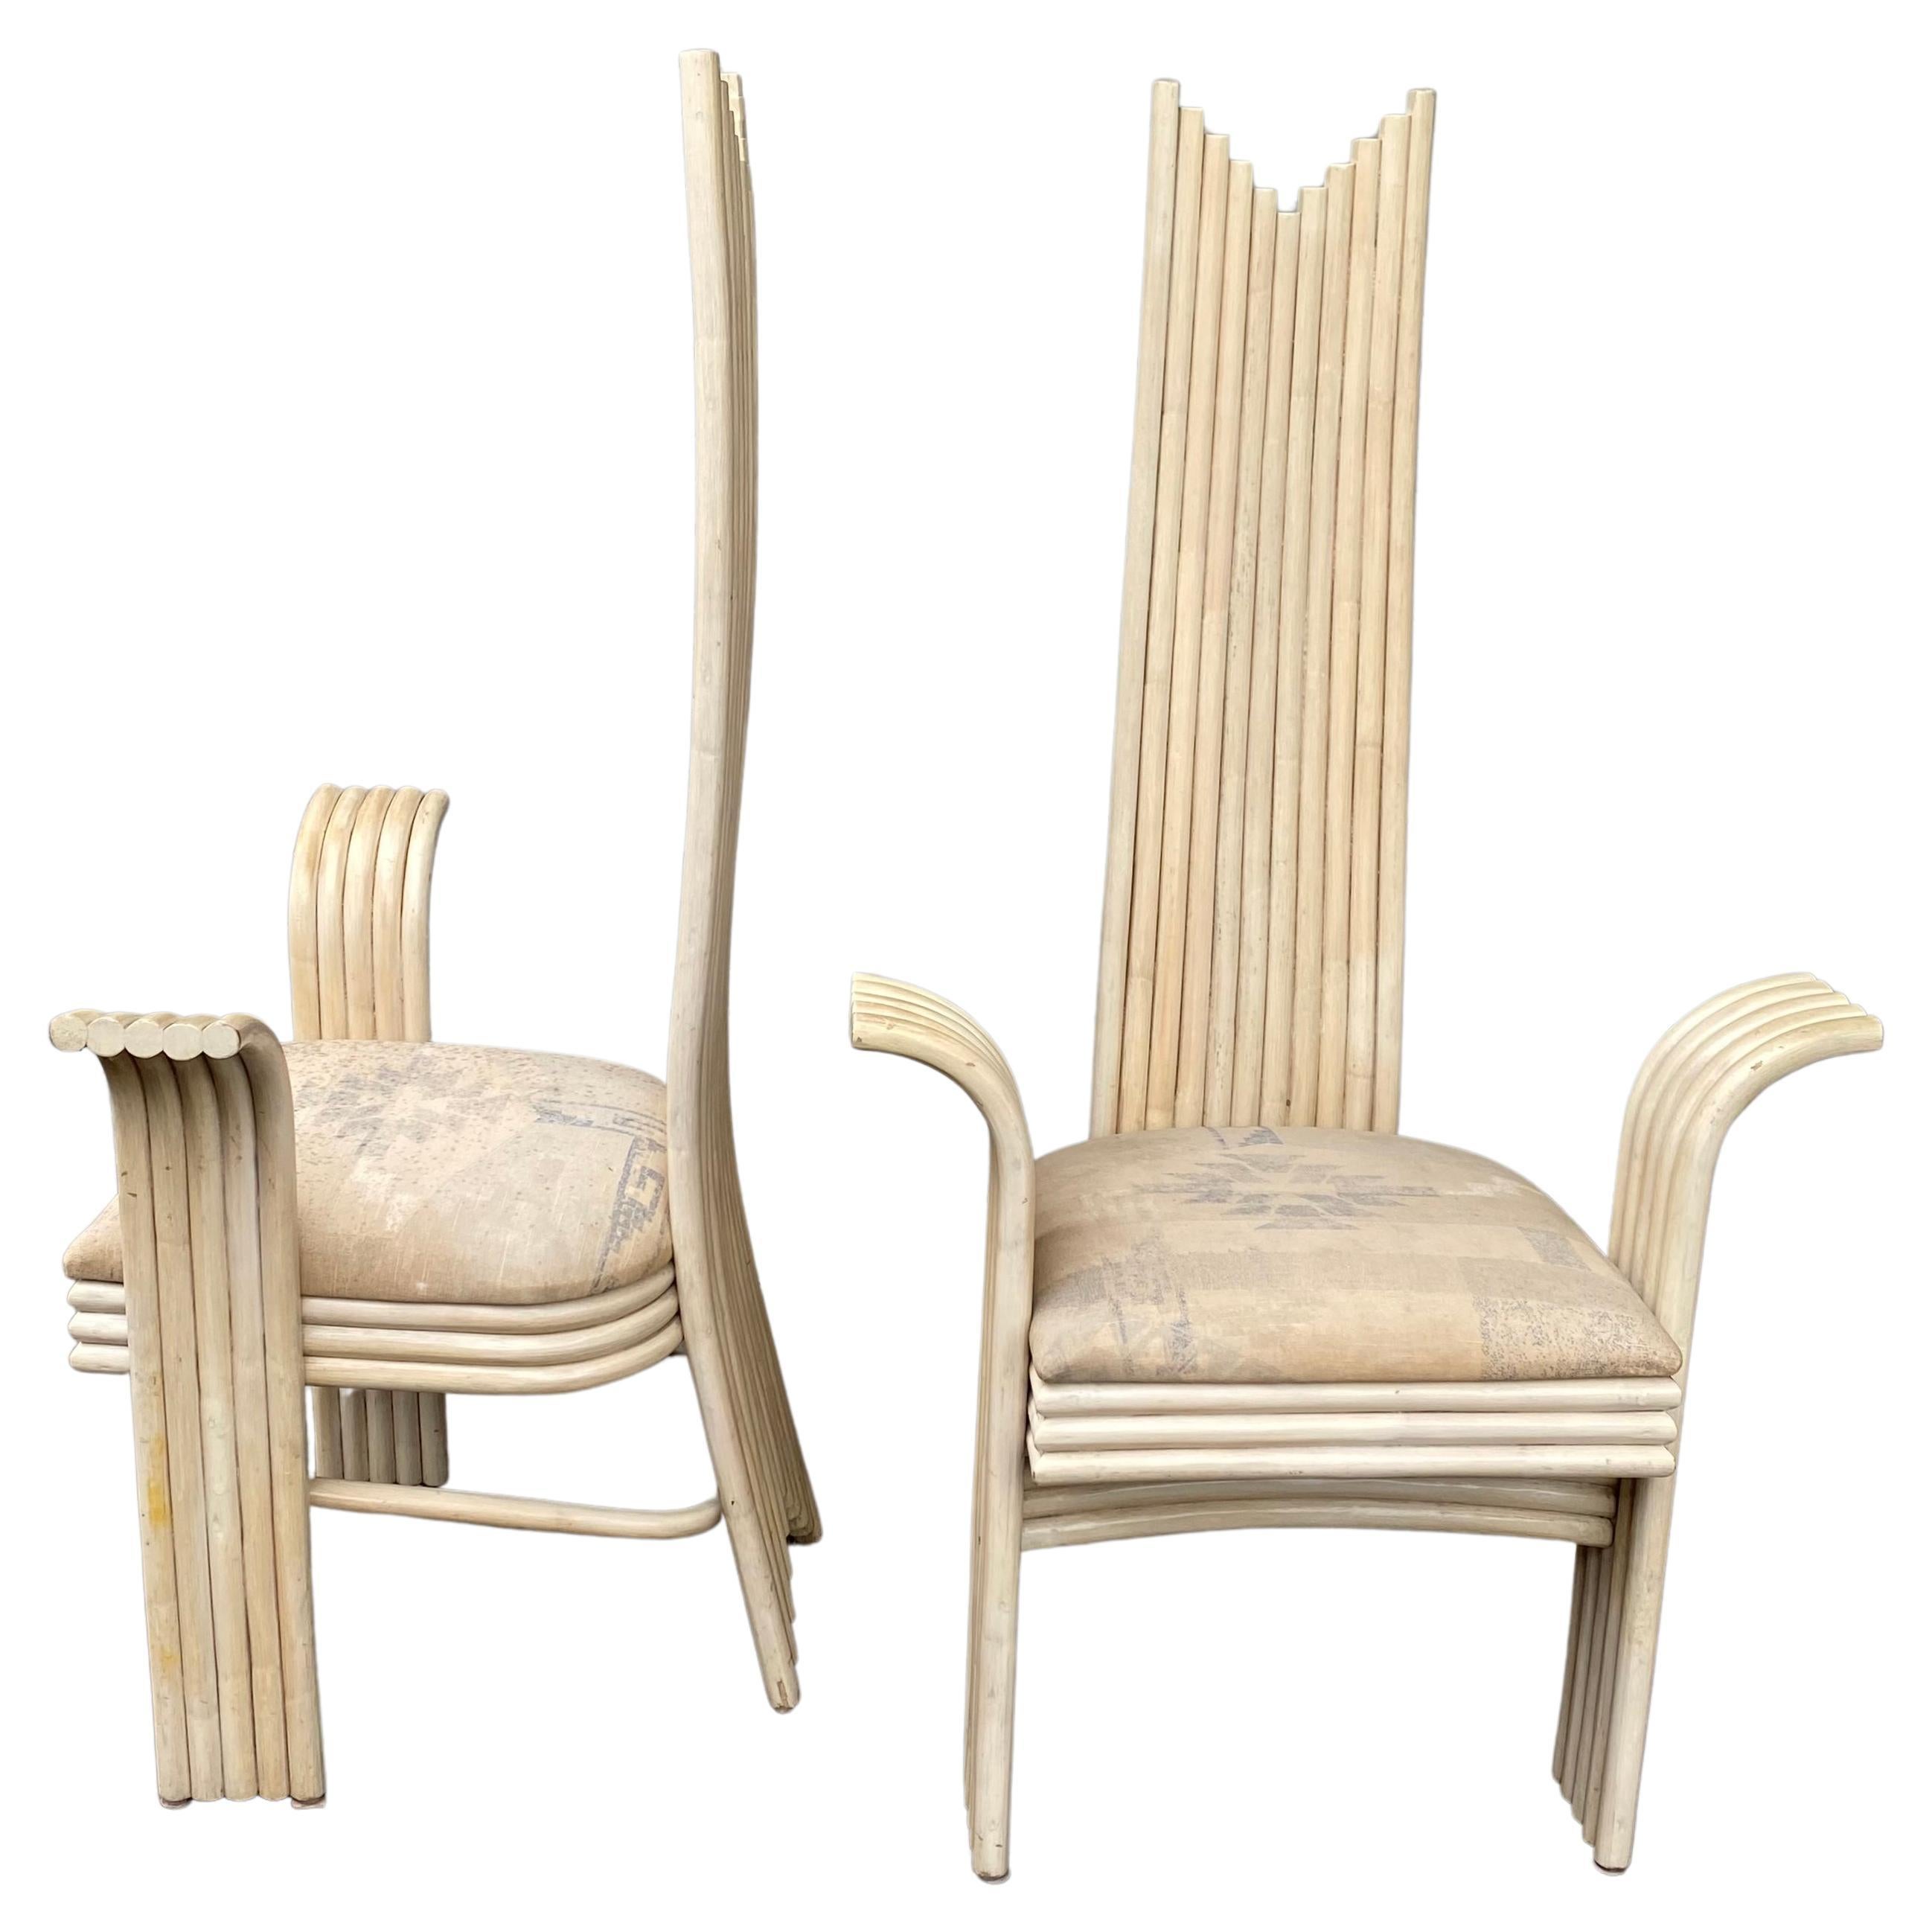 Stunning, Unusual Pair Rattan/ Bamboo Arm Chairs, Attrib to Danny Ho Fong For Sale